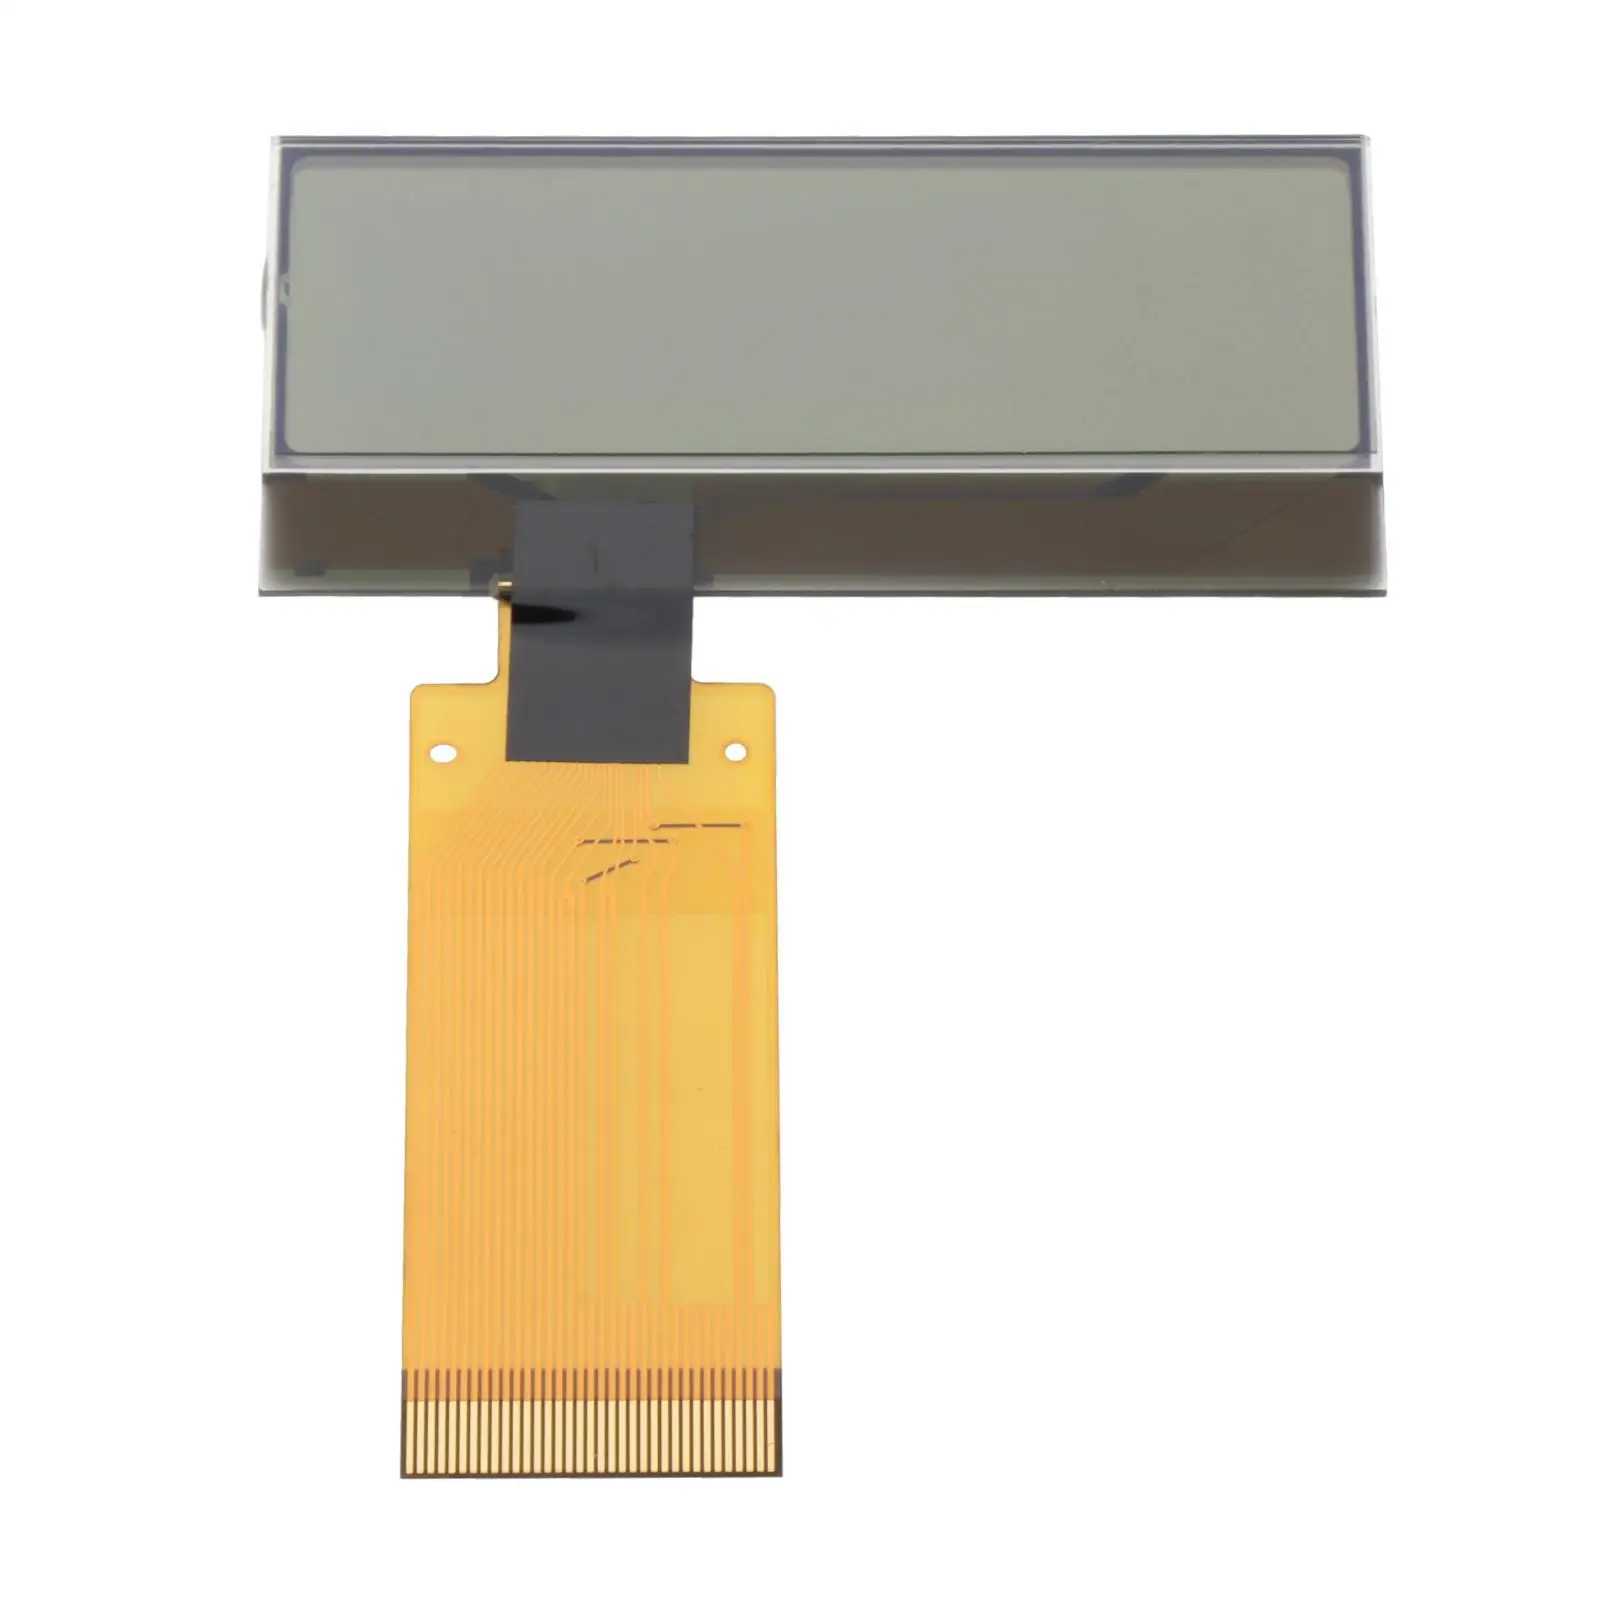 LCD Display 79-8M0062382 79- 8M0059084 Fits for Mercury  SC1000